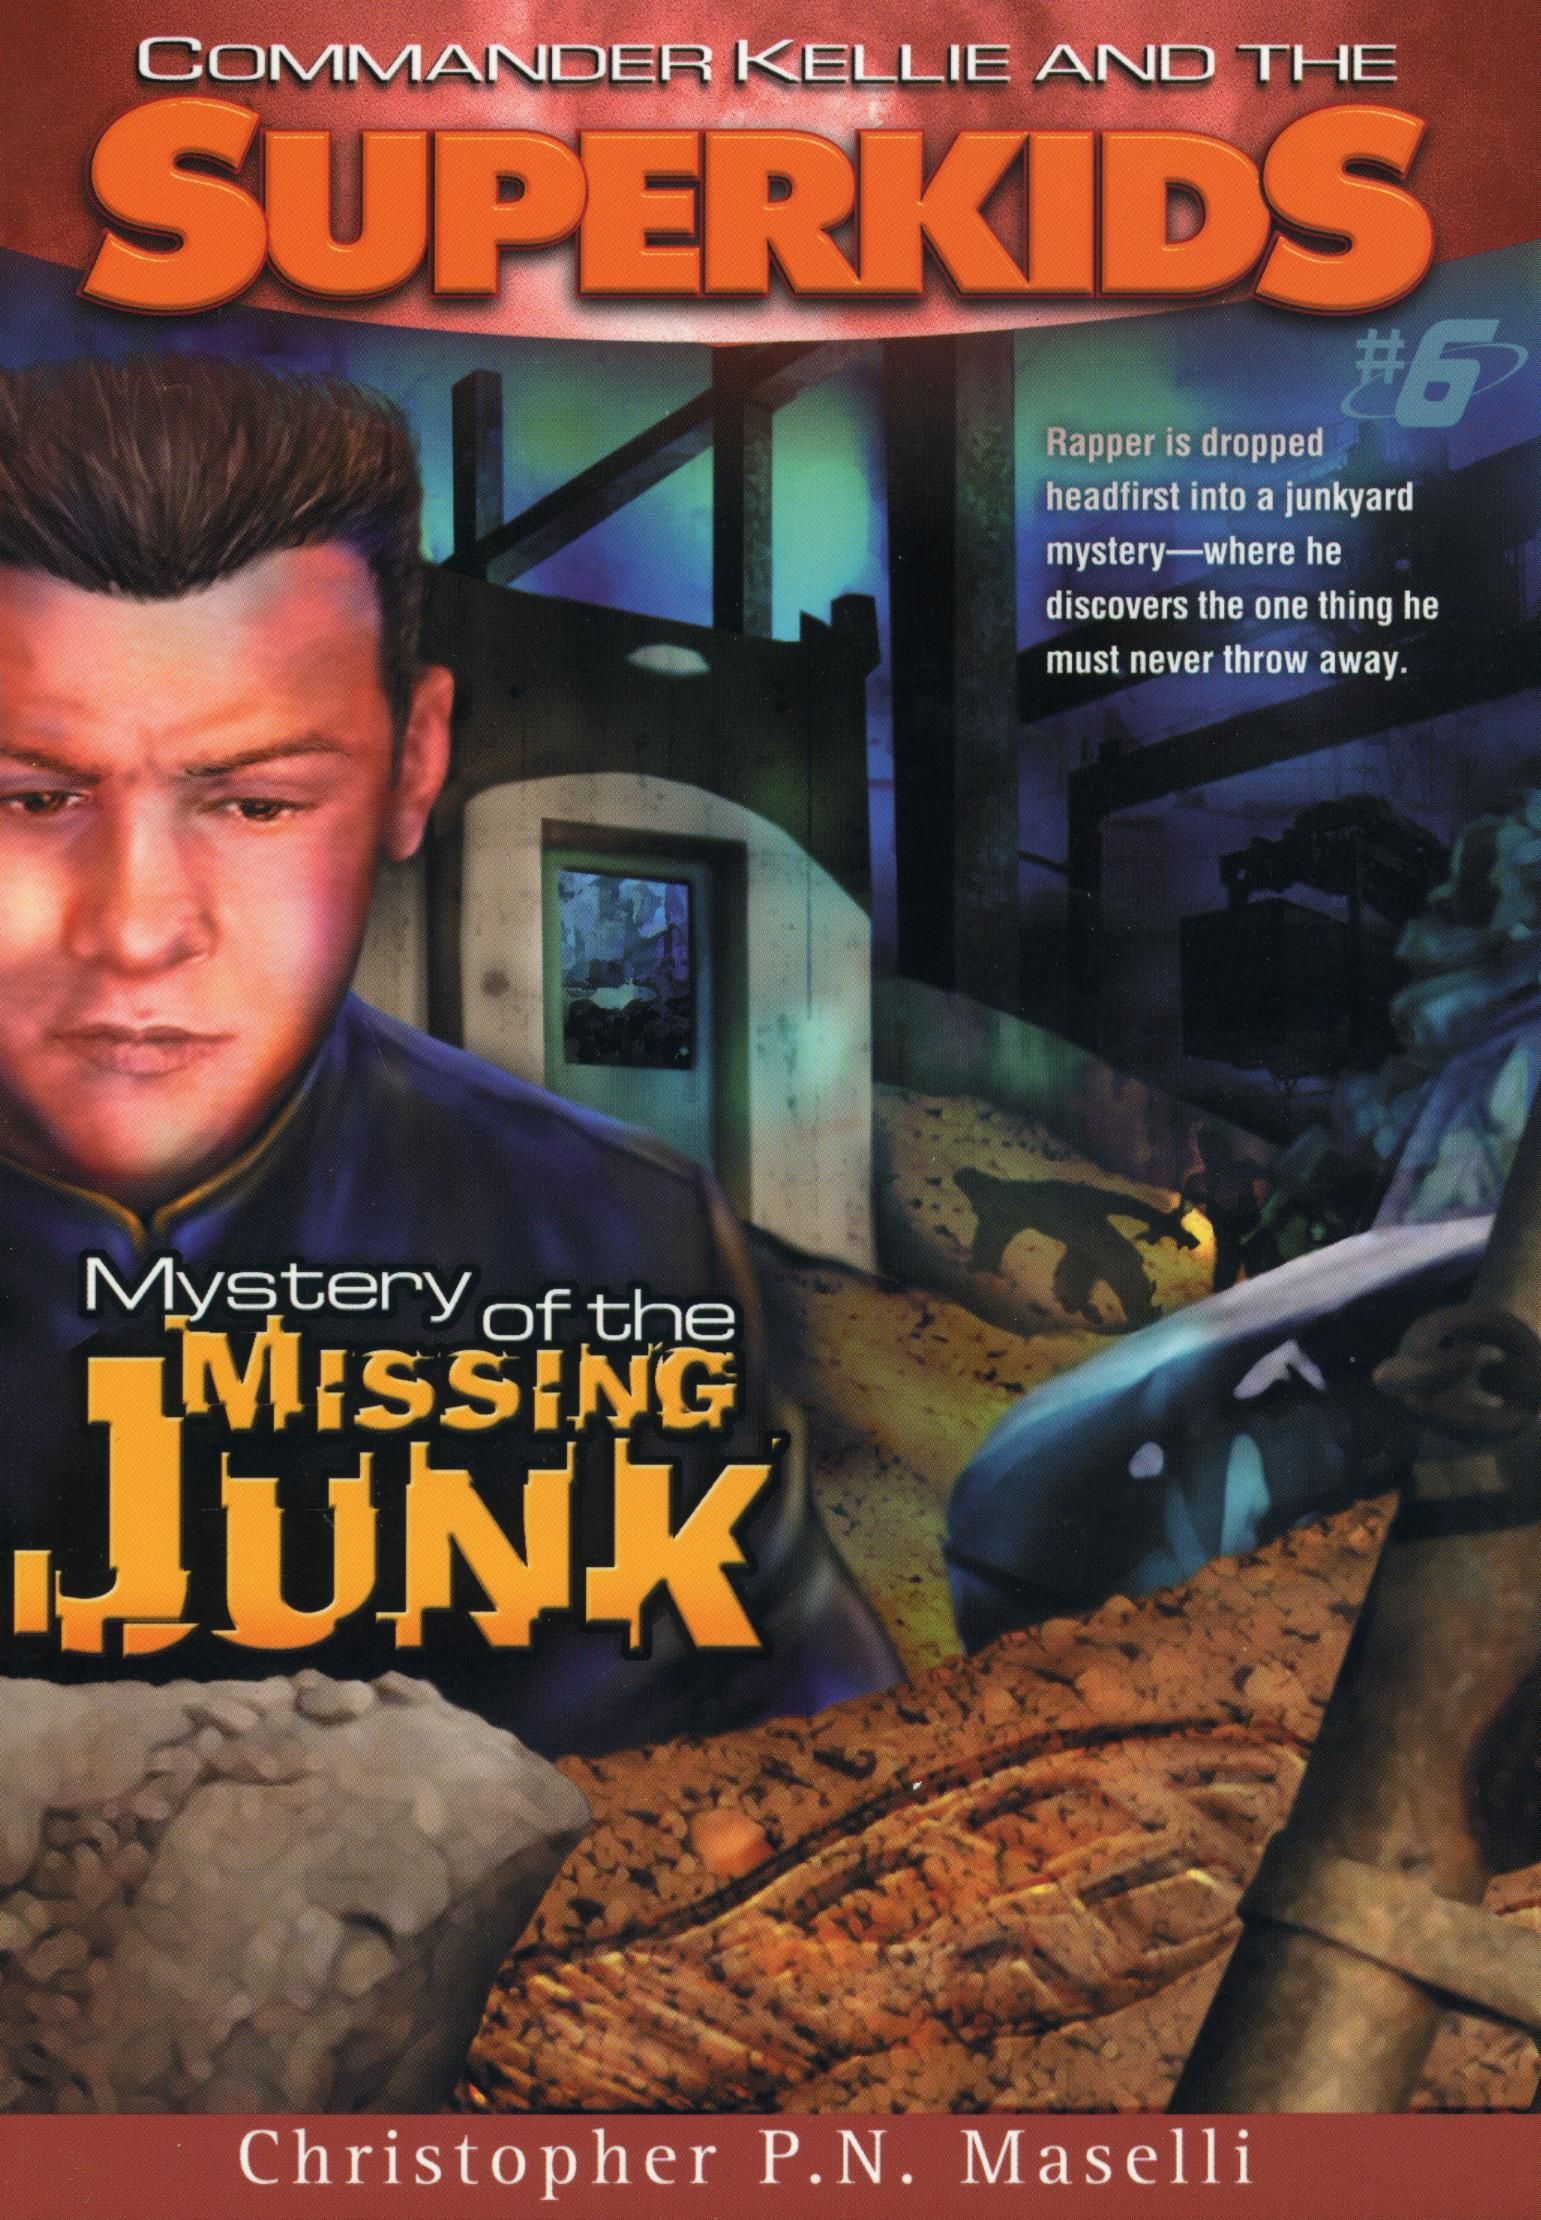 Commander Kellie and the Superkids: Mystery of the Missing Junk